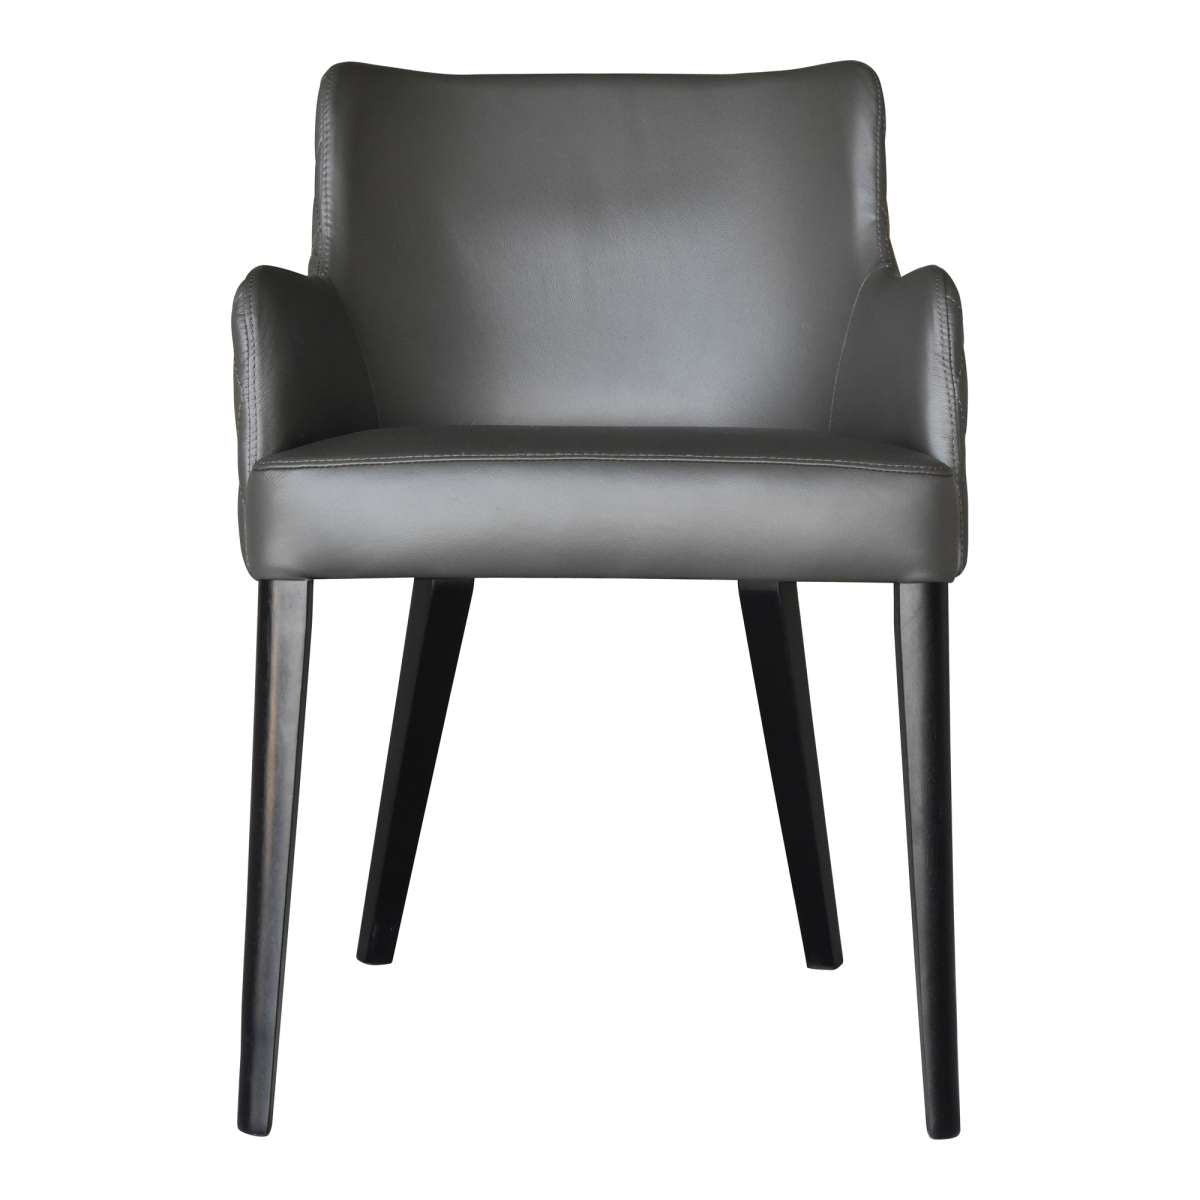 Zayden Dining Chair Black By Moe's Home Collection